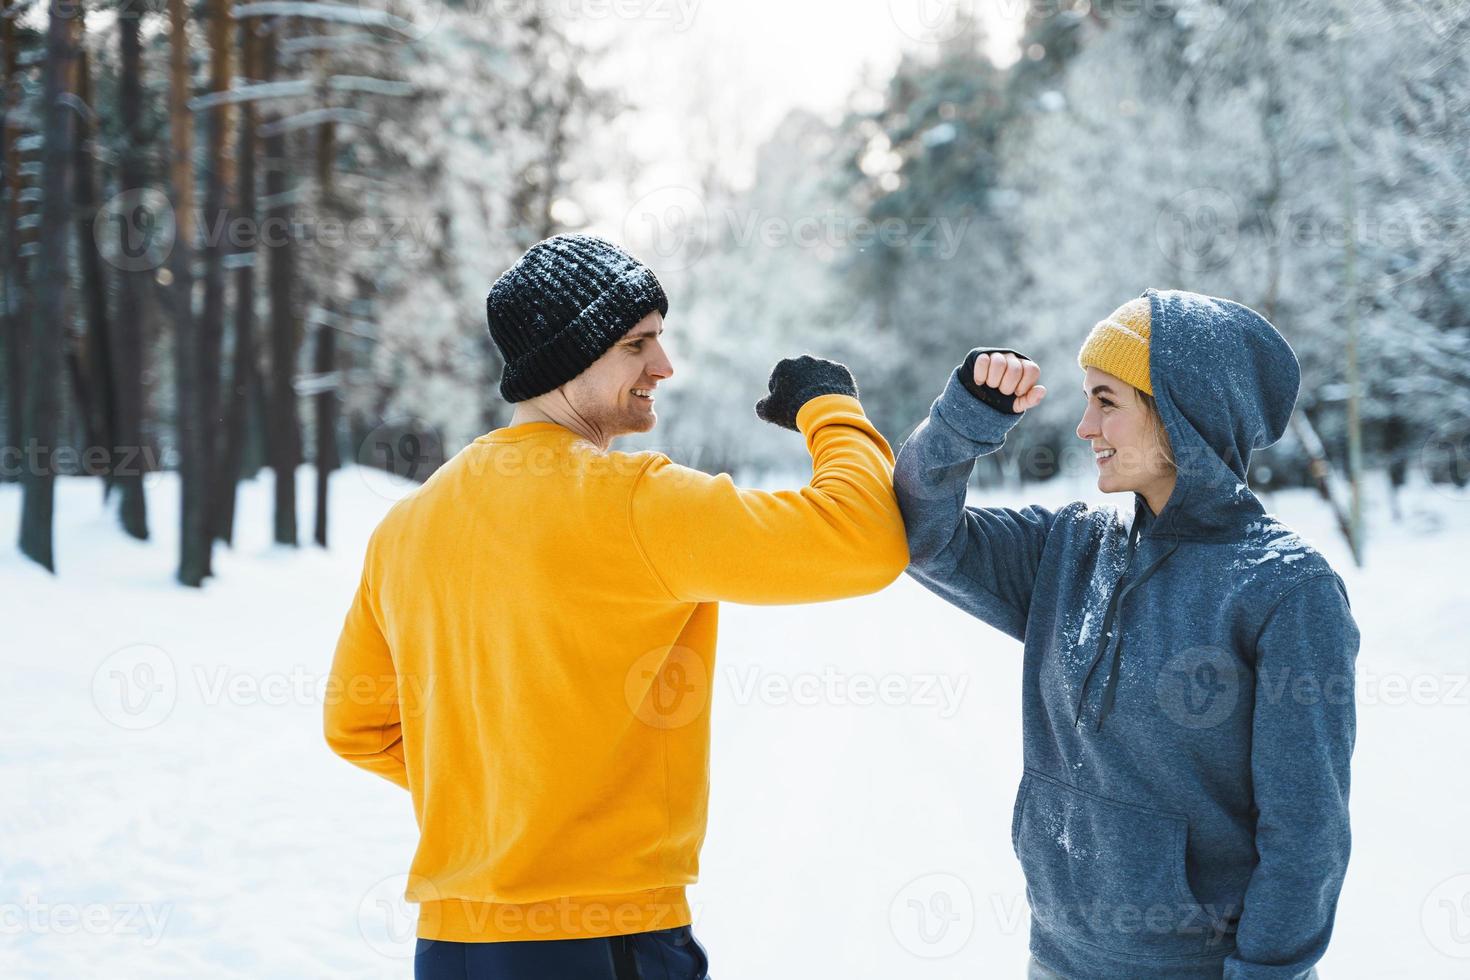 Two joggers greeting each other with a elbow bump gesture during winter workout photo